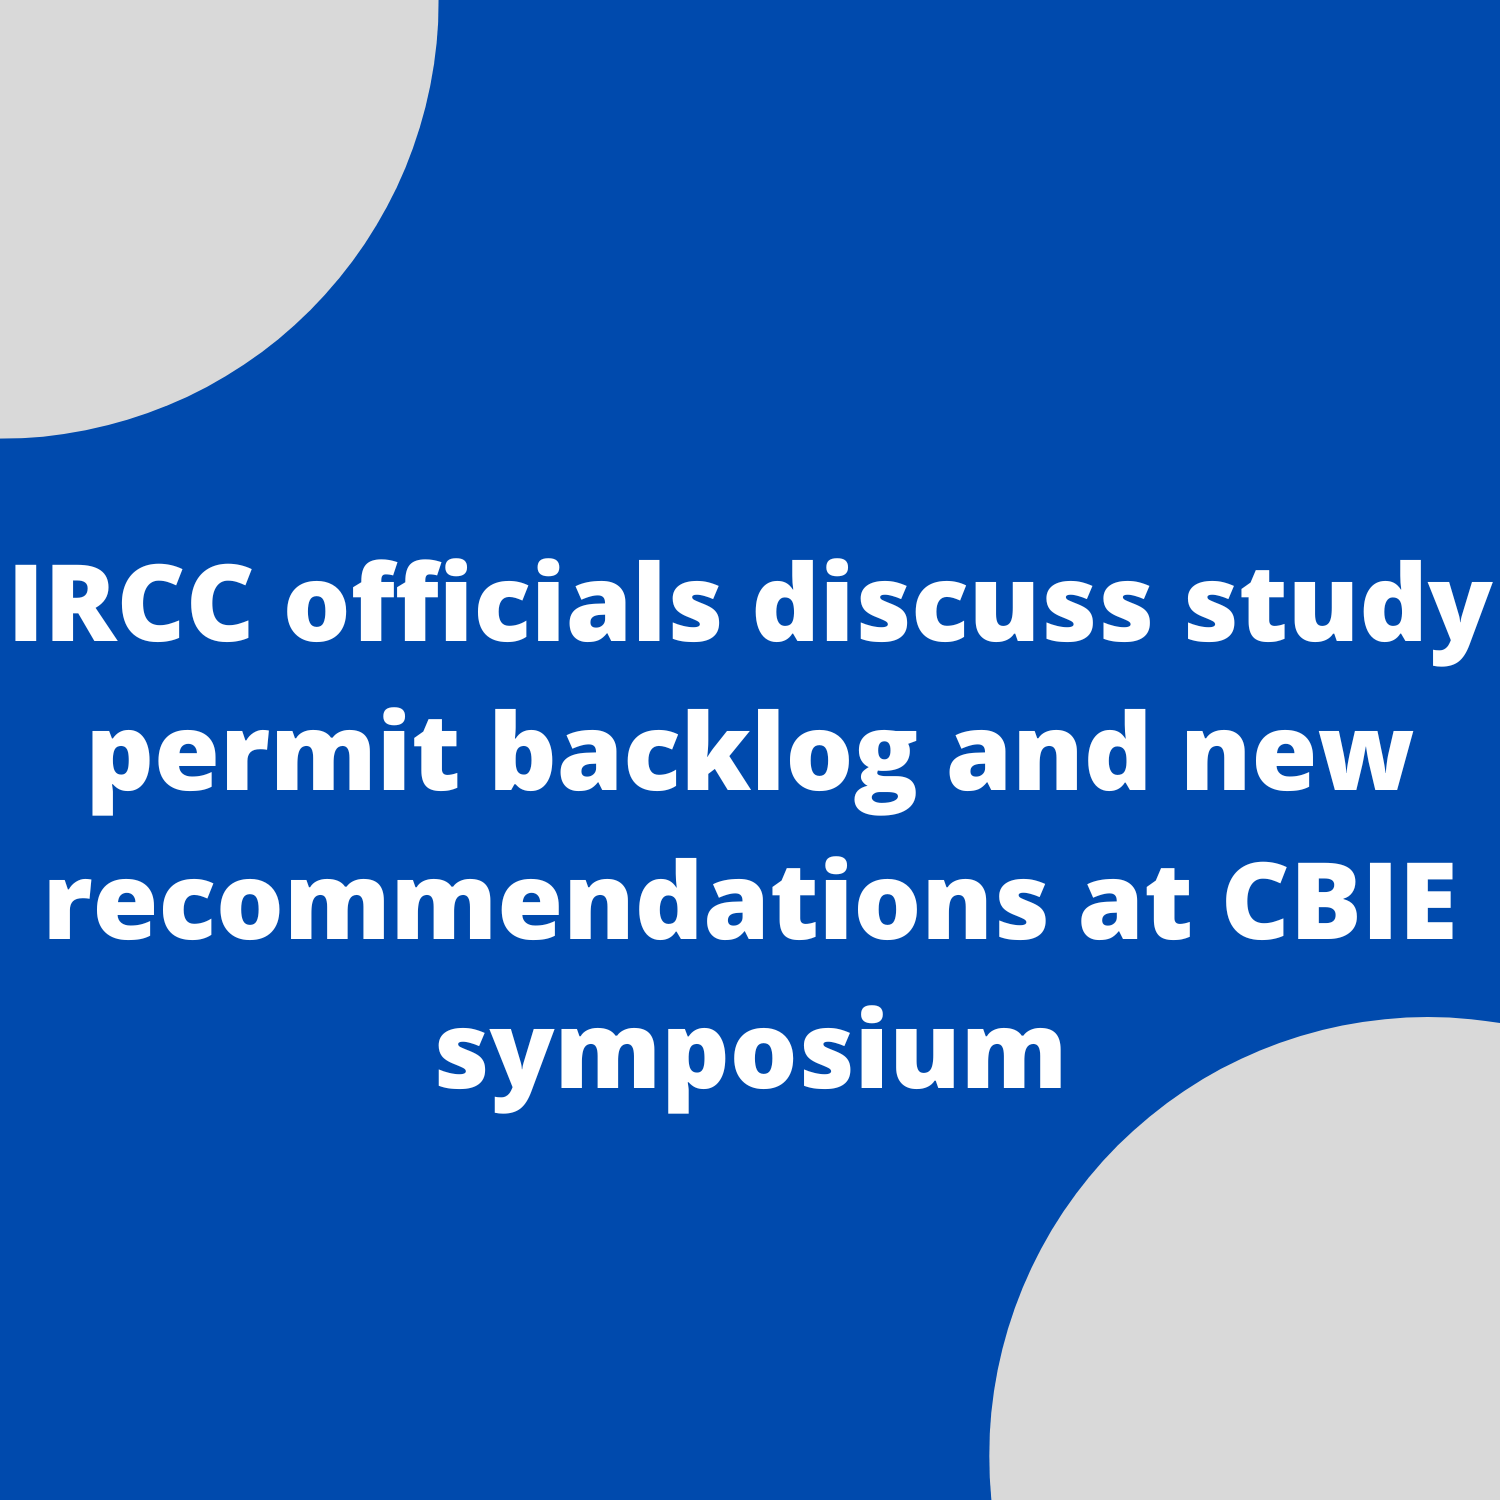 IRCC officials discuss study permit backlog and new recommendations at CBIE symposium